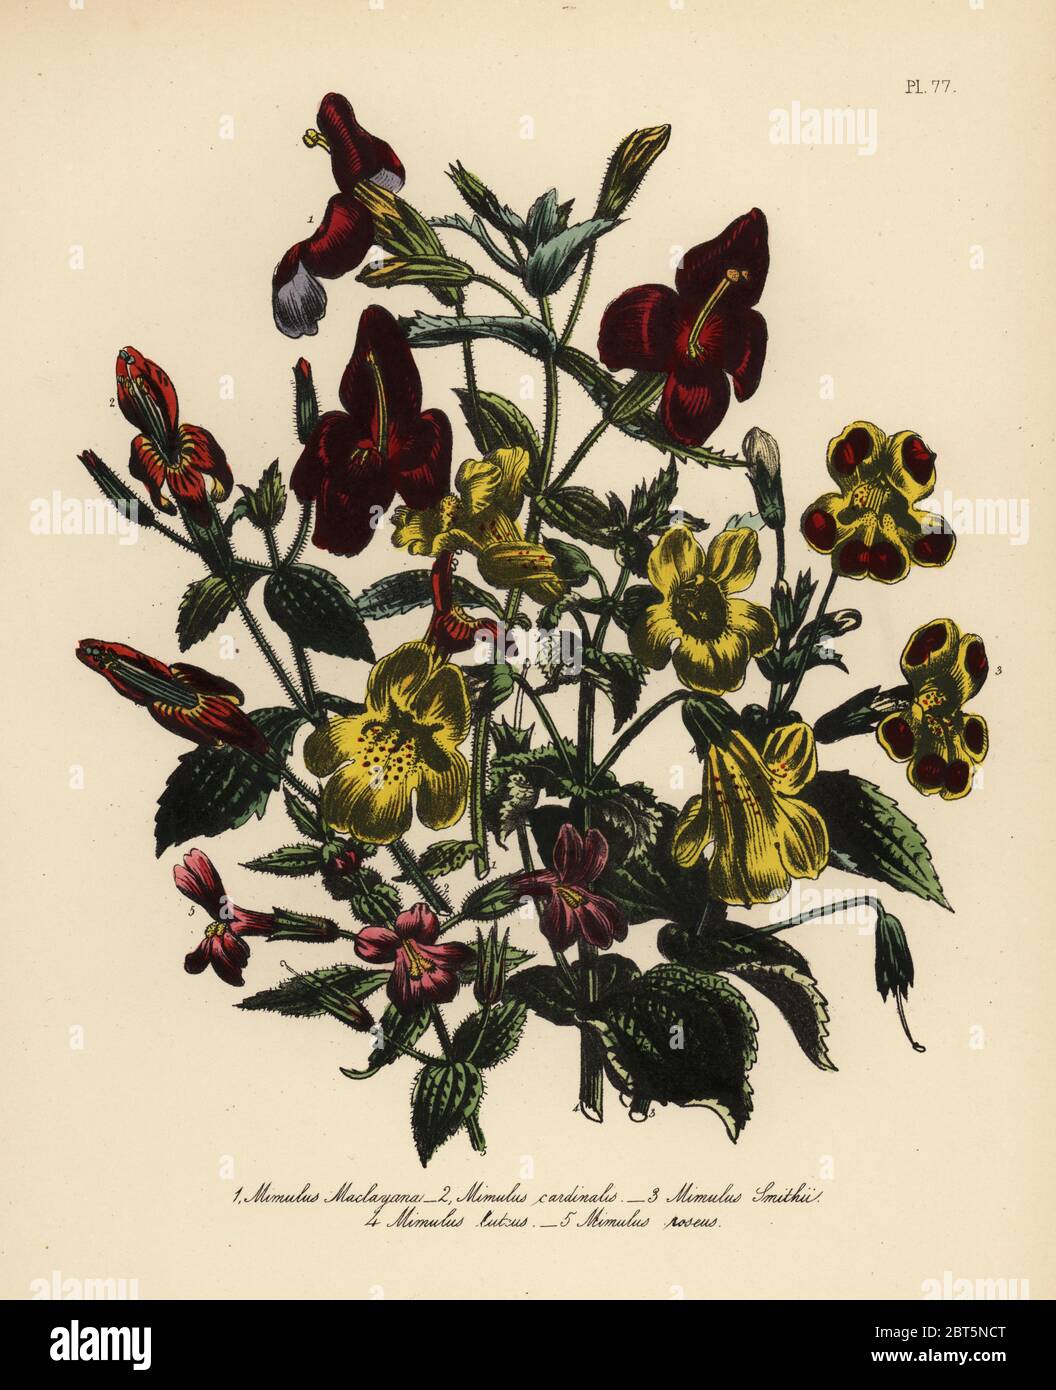 Mimulus maclayana, bright-scarlet mimulus, M. cardinalis, Mr. Smith's mimulus, M. smithii, yellow-flowered mimulus, M. luteus, and rose-coloured mimulus, M. roseus. Handfinished chromolithograph by Henry Noel Humphreys after an illustration by Jane Loudon from Mrs. Jane Loudon's Ladies Flower Garden of Ornamental Perennials, William S. Orr, London, 1849. Stock Photo